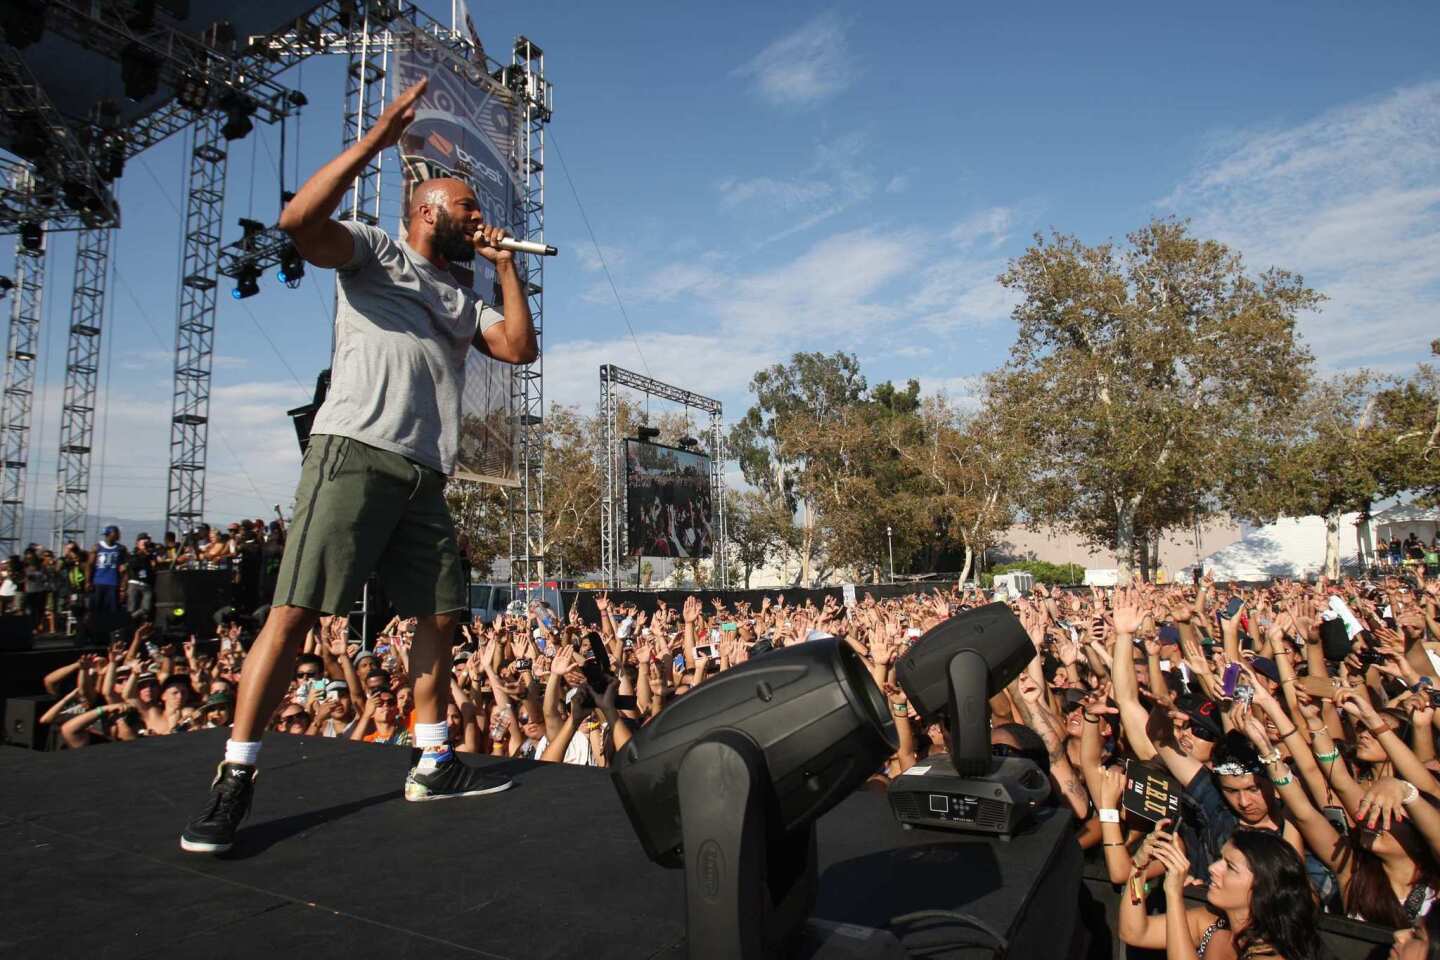 The crowd cheers on Common as he performs during the first day of Rock the Bells at the San Bernardino Nos Events Center.